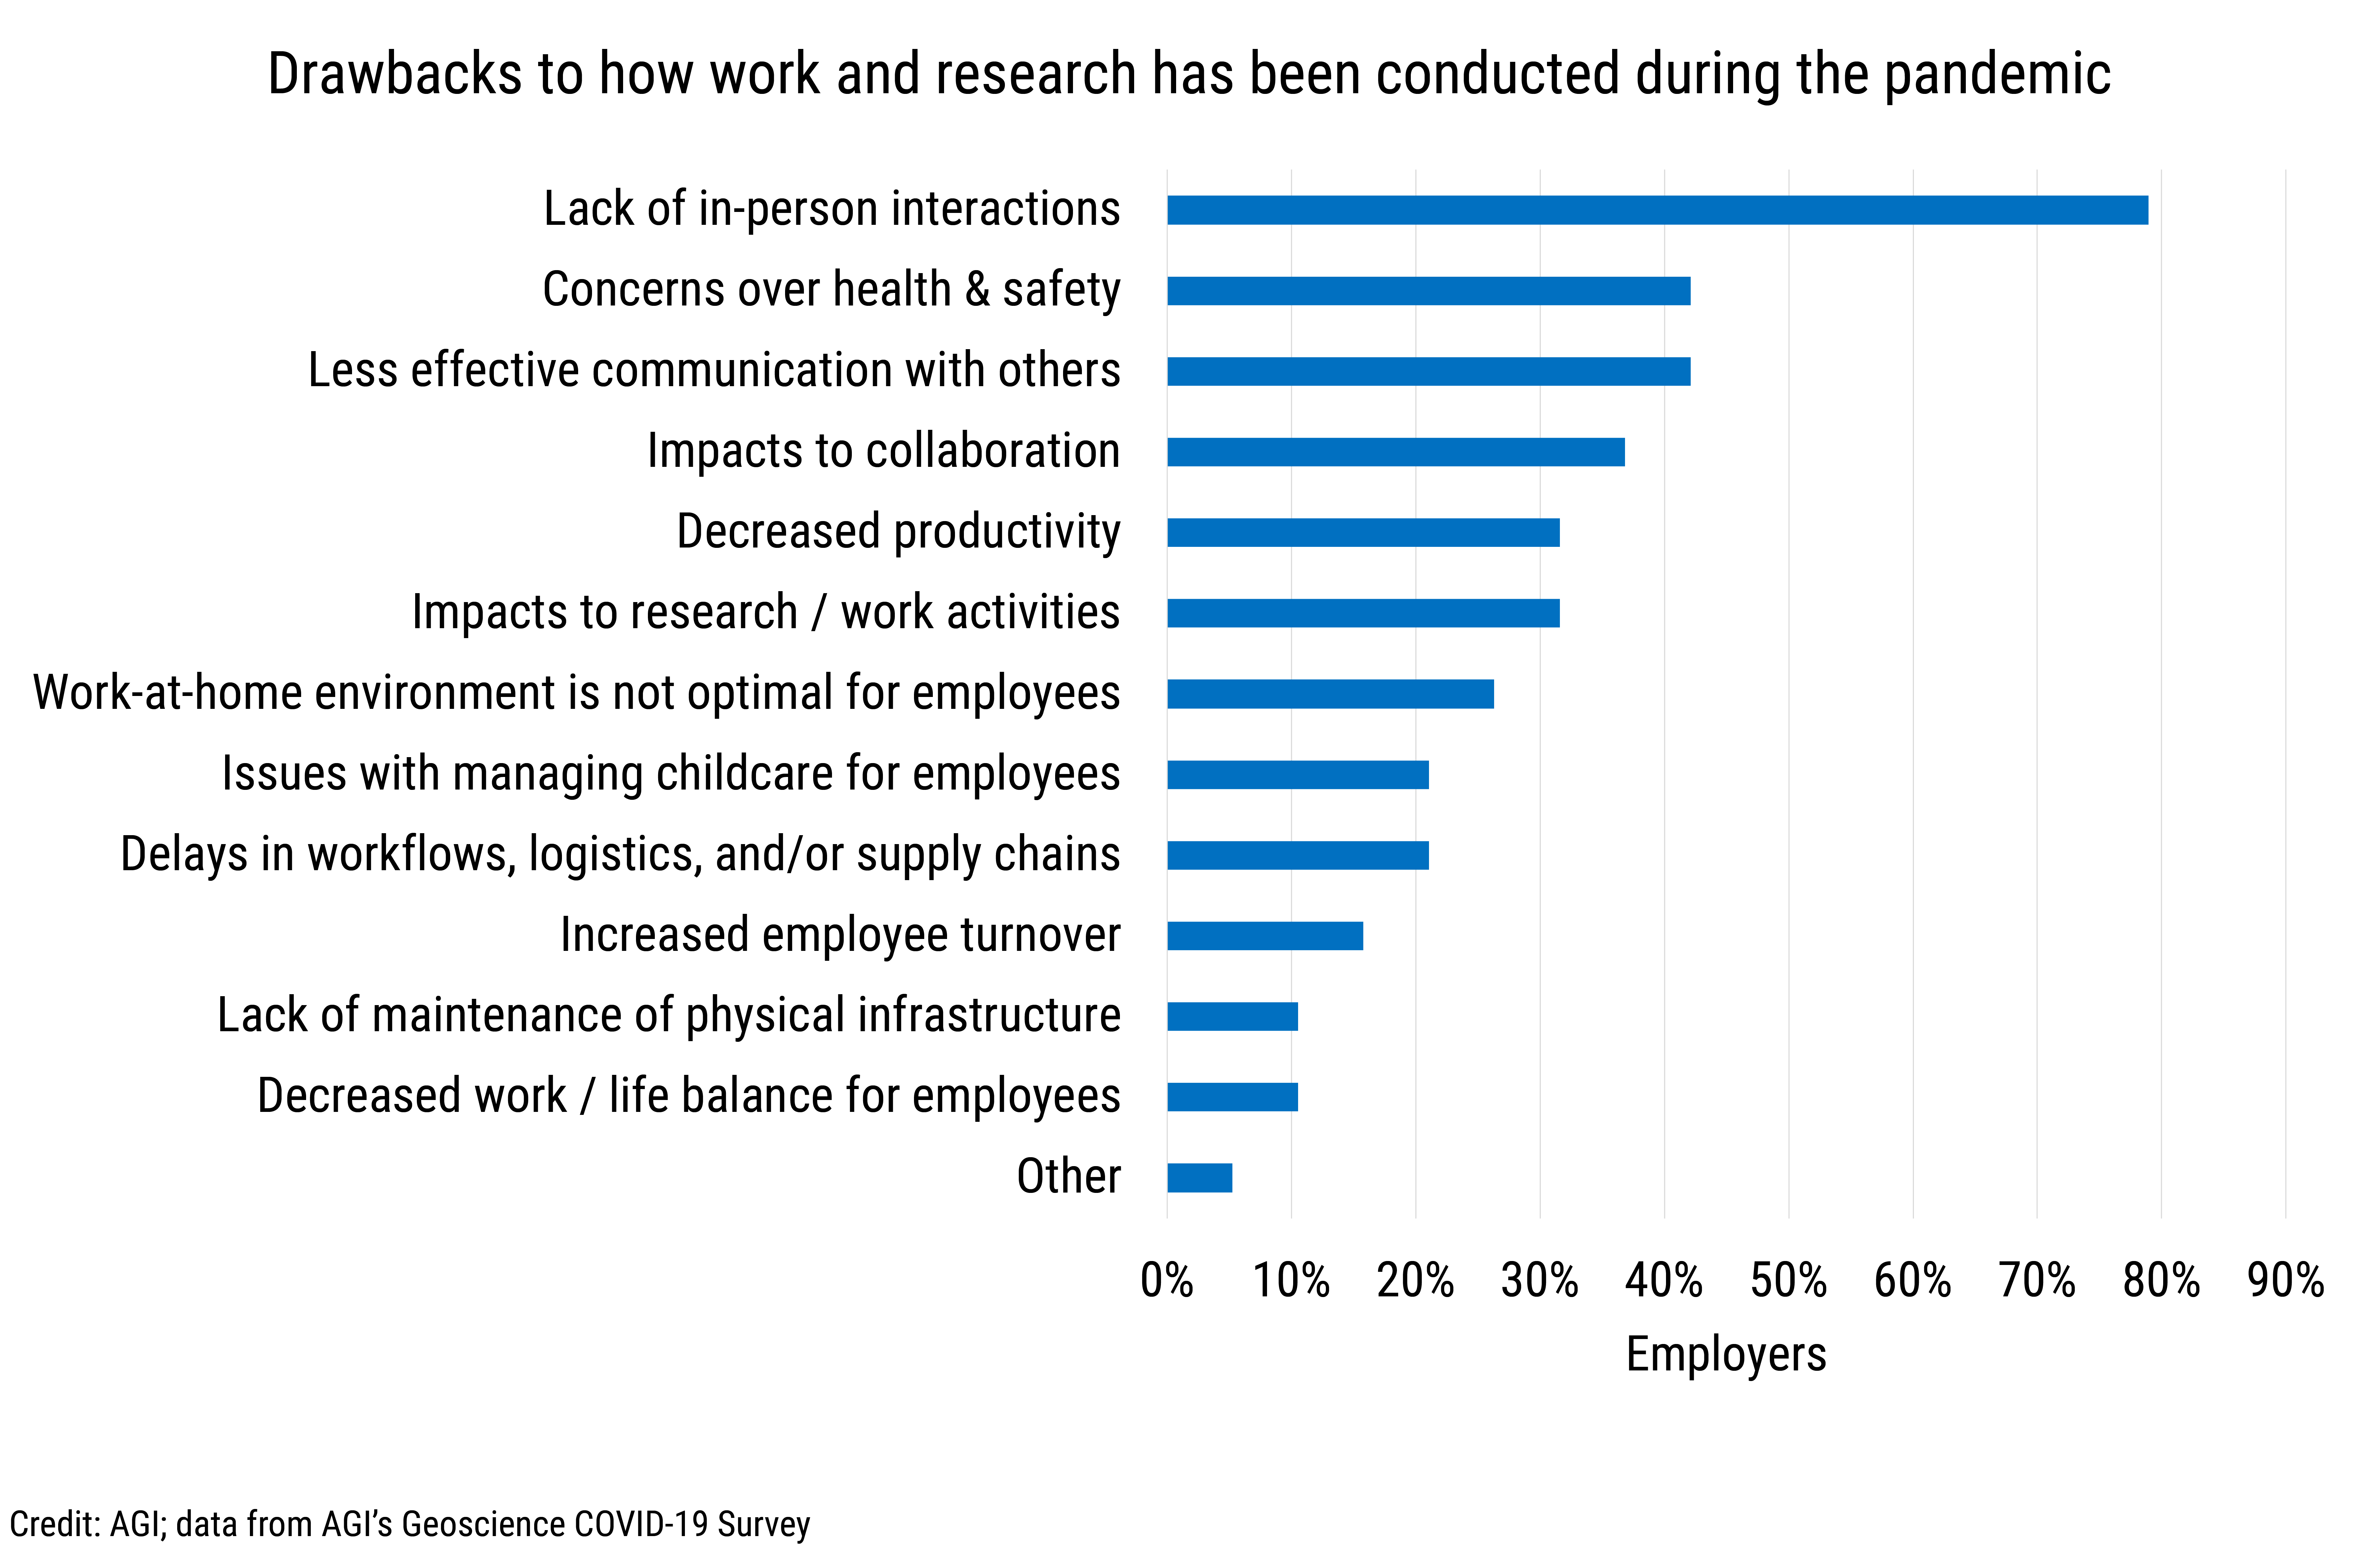 DB_2022-002 chart 10: Drawbacks to how work and research has been conducted during the pandemic (Credit: AGI; data from AGI's Geoscience COVID-19 Survey)